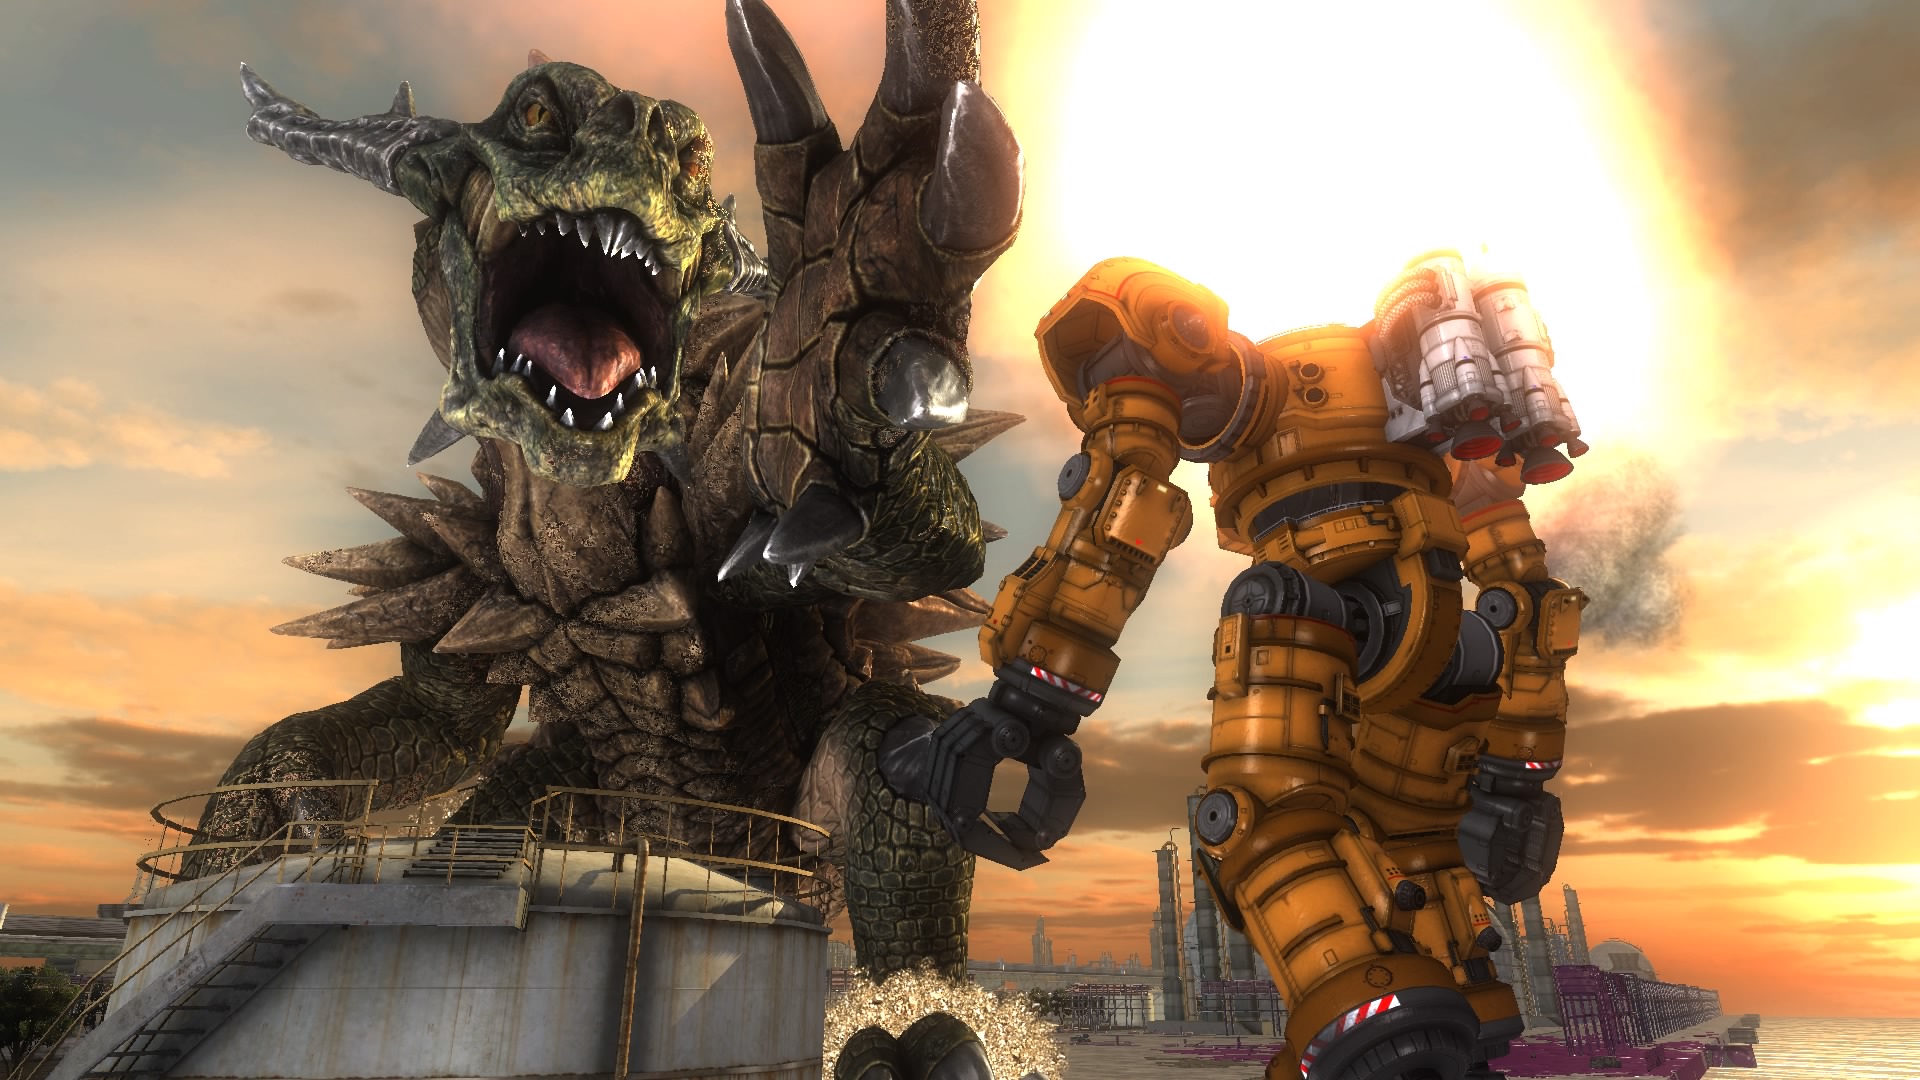 PC Port For Earth Defense Force 5 Is Now Available, Another Chance To Experience Some Cheesy Bug Shooting Fun